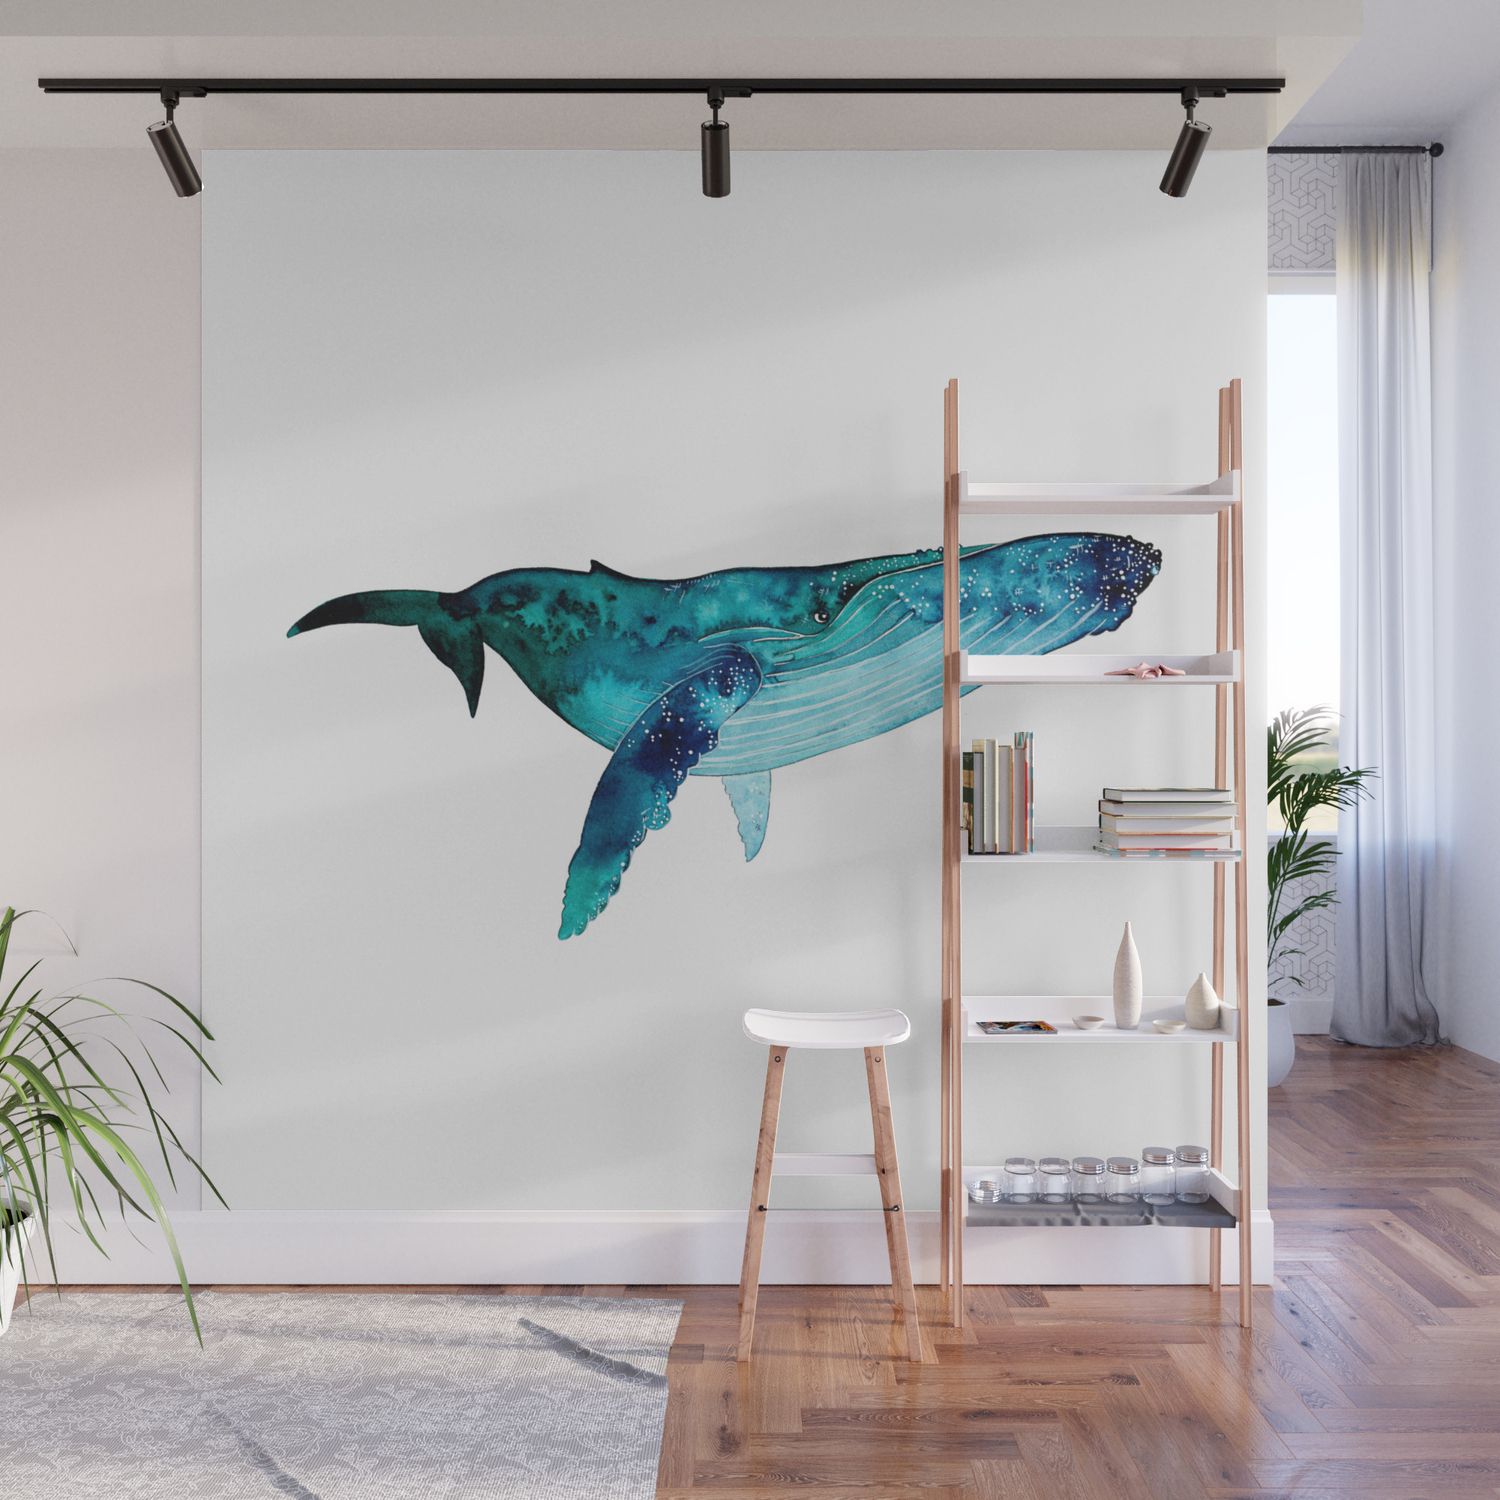 Happy Whale Wall Muralmichelle Fleur | Society6 Intended For Latest Whale Wall Art (View 10 of 20)